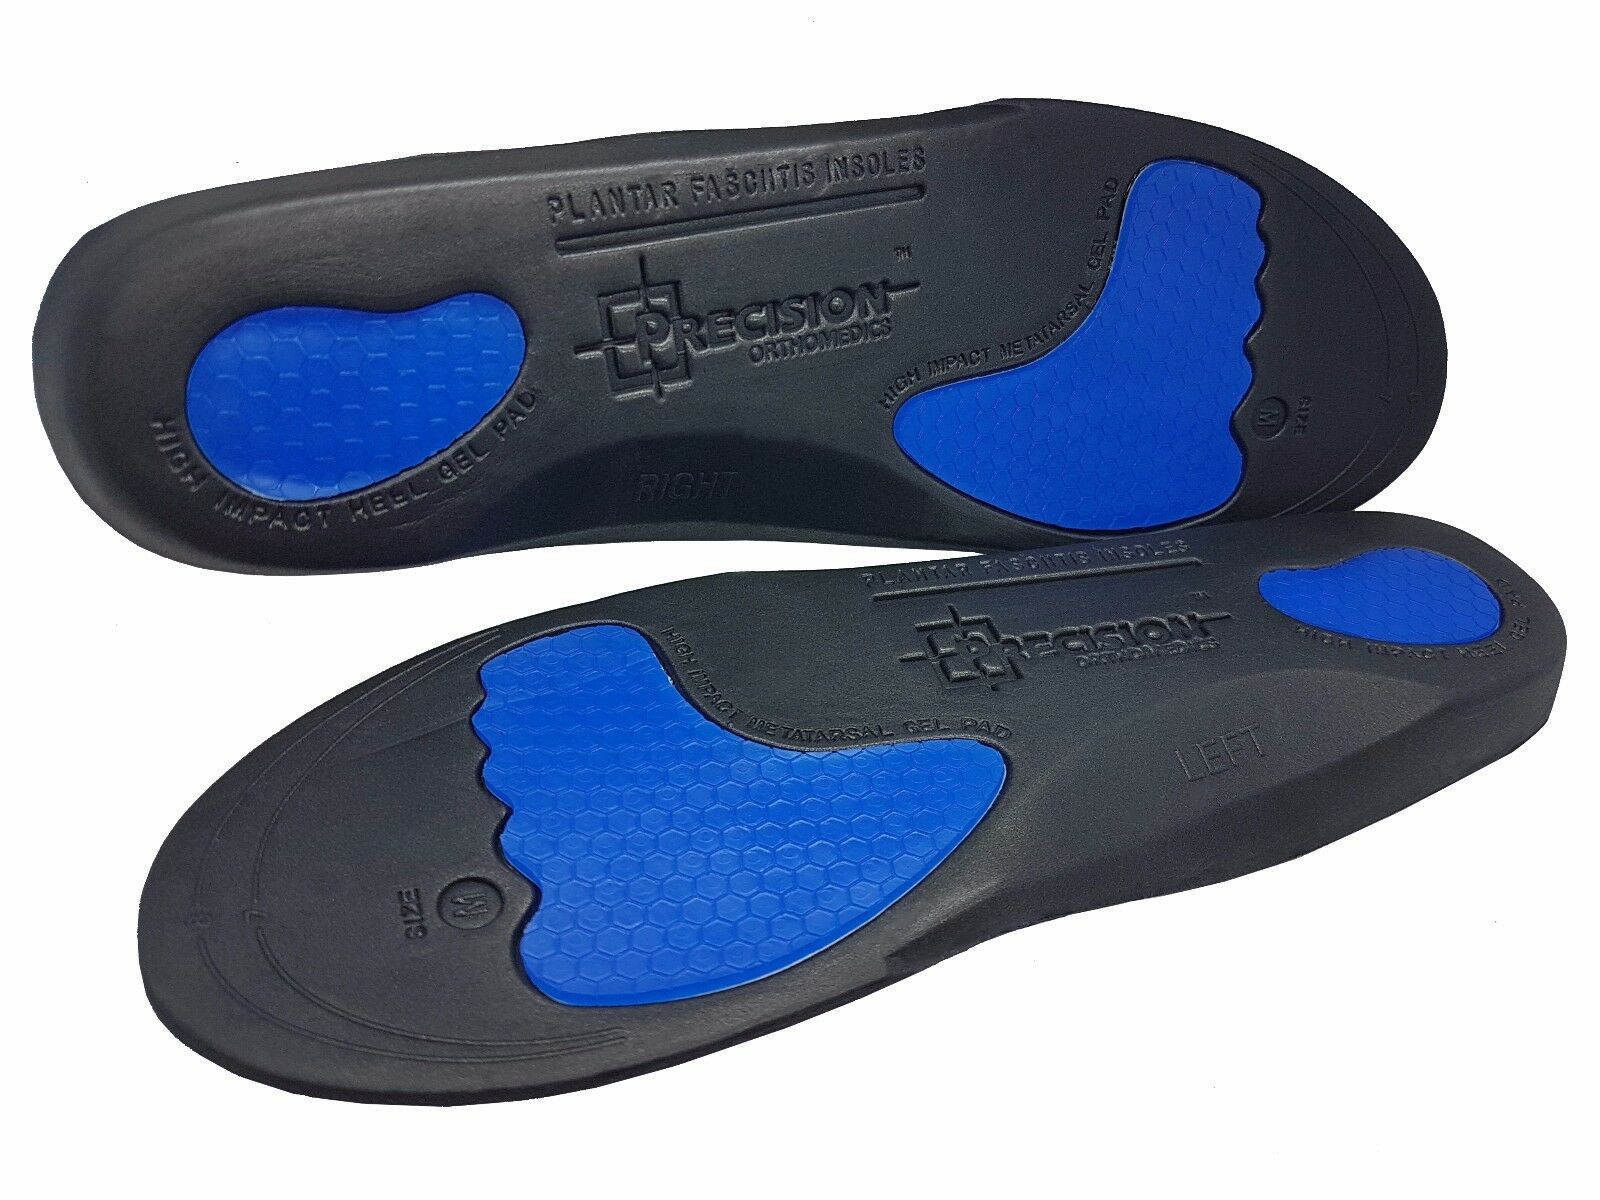 Full Length - Orthotic Arch Support Insoles - Precision Orthomedics